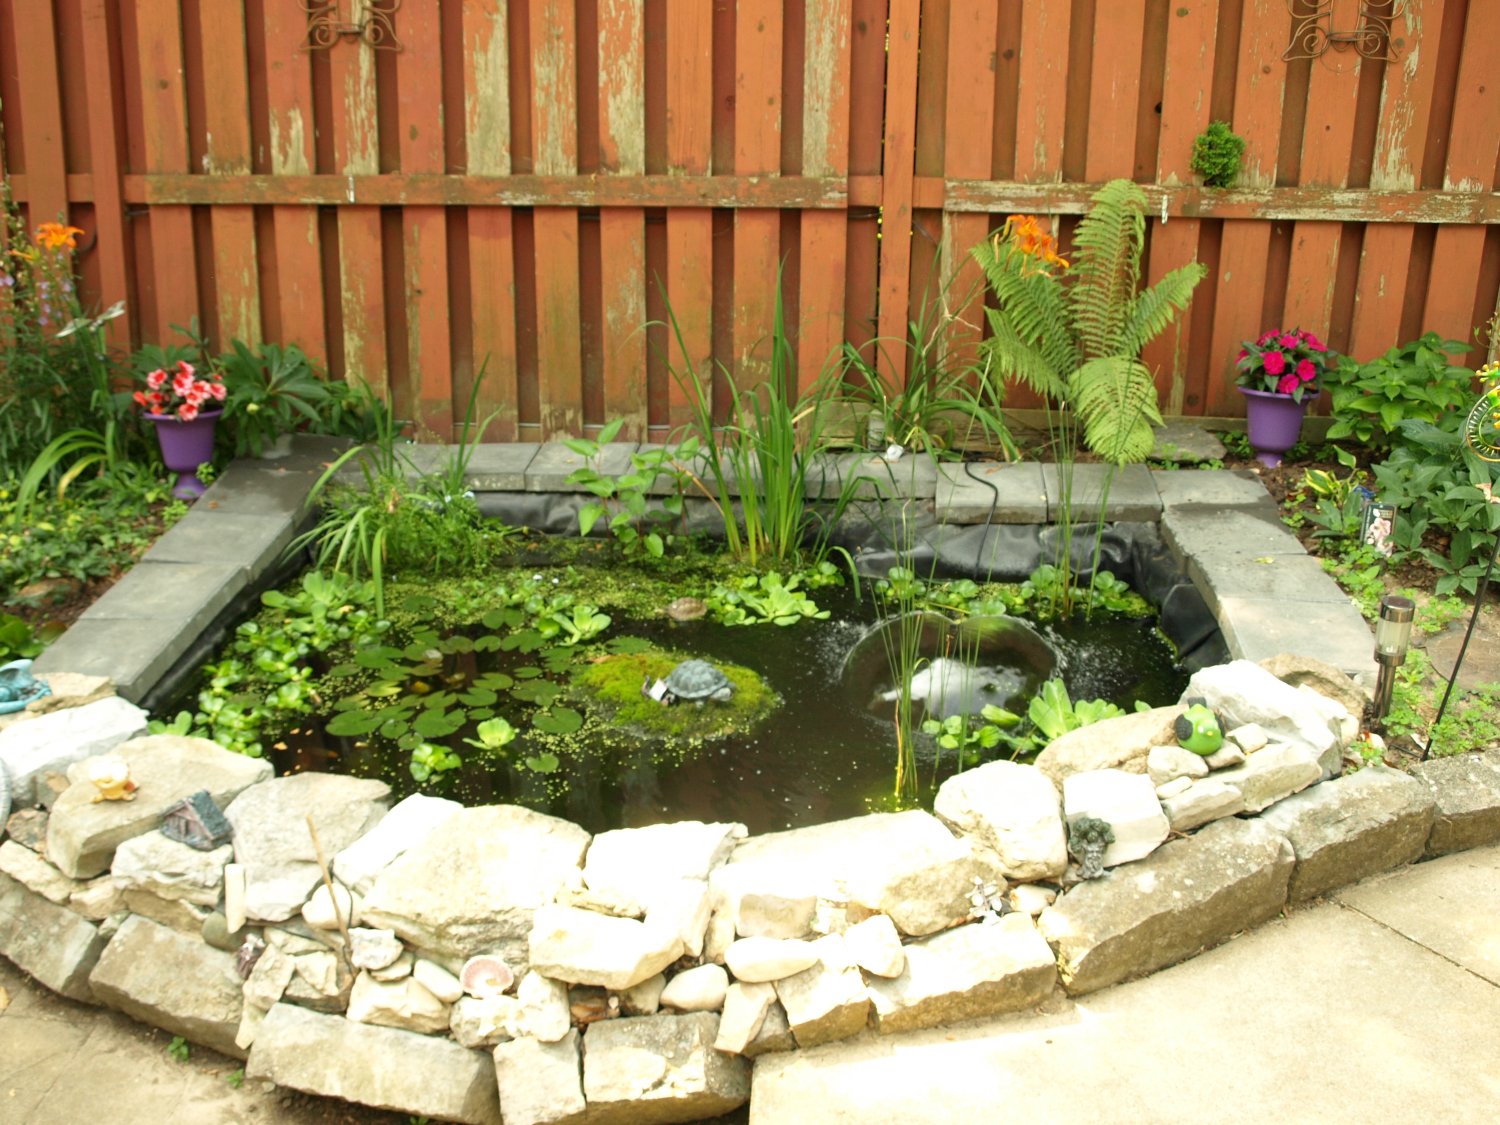 Our pond in all its glory